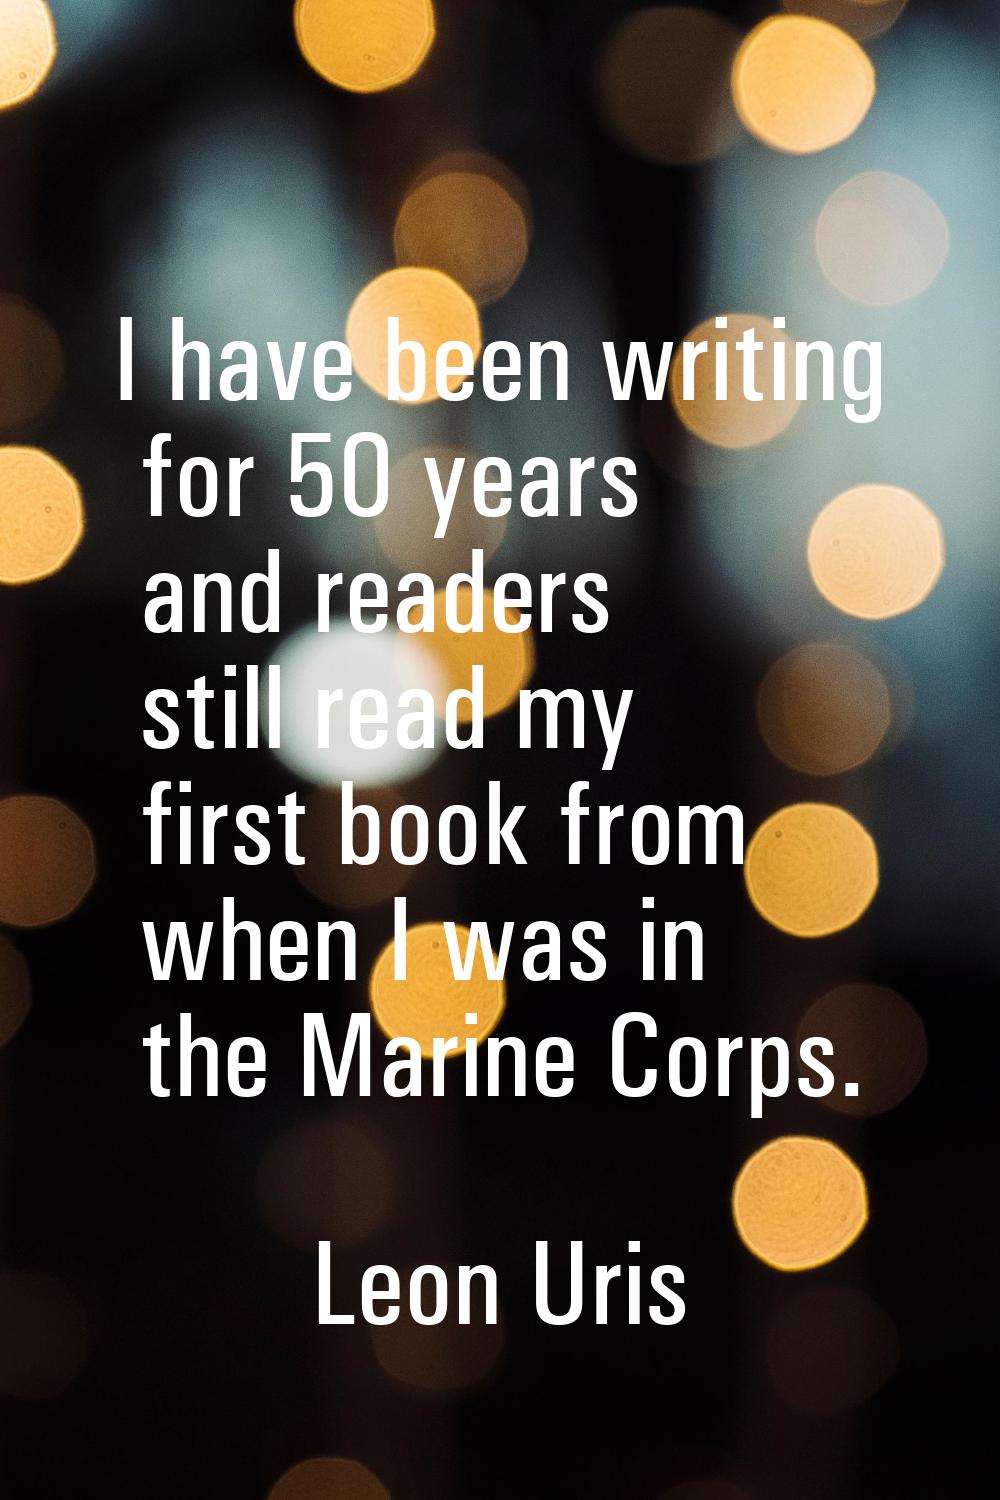 I have been writing for 50 years and readers still read my first book from when I was in the Marine